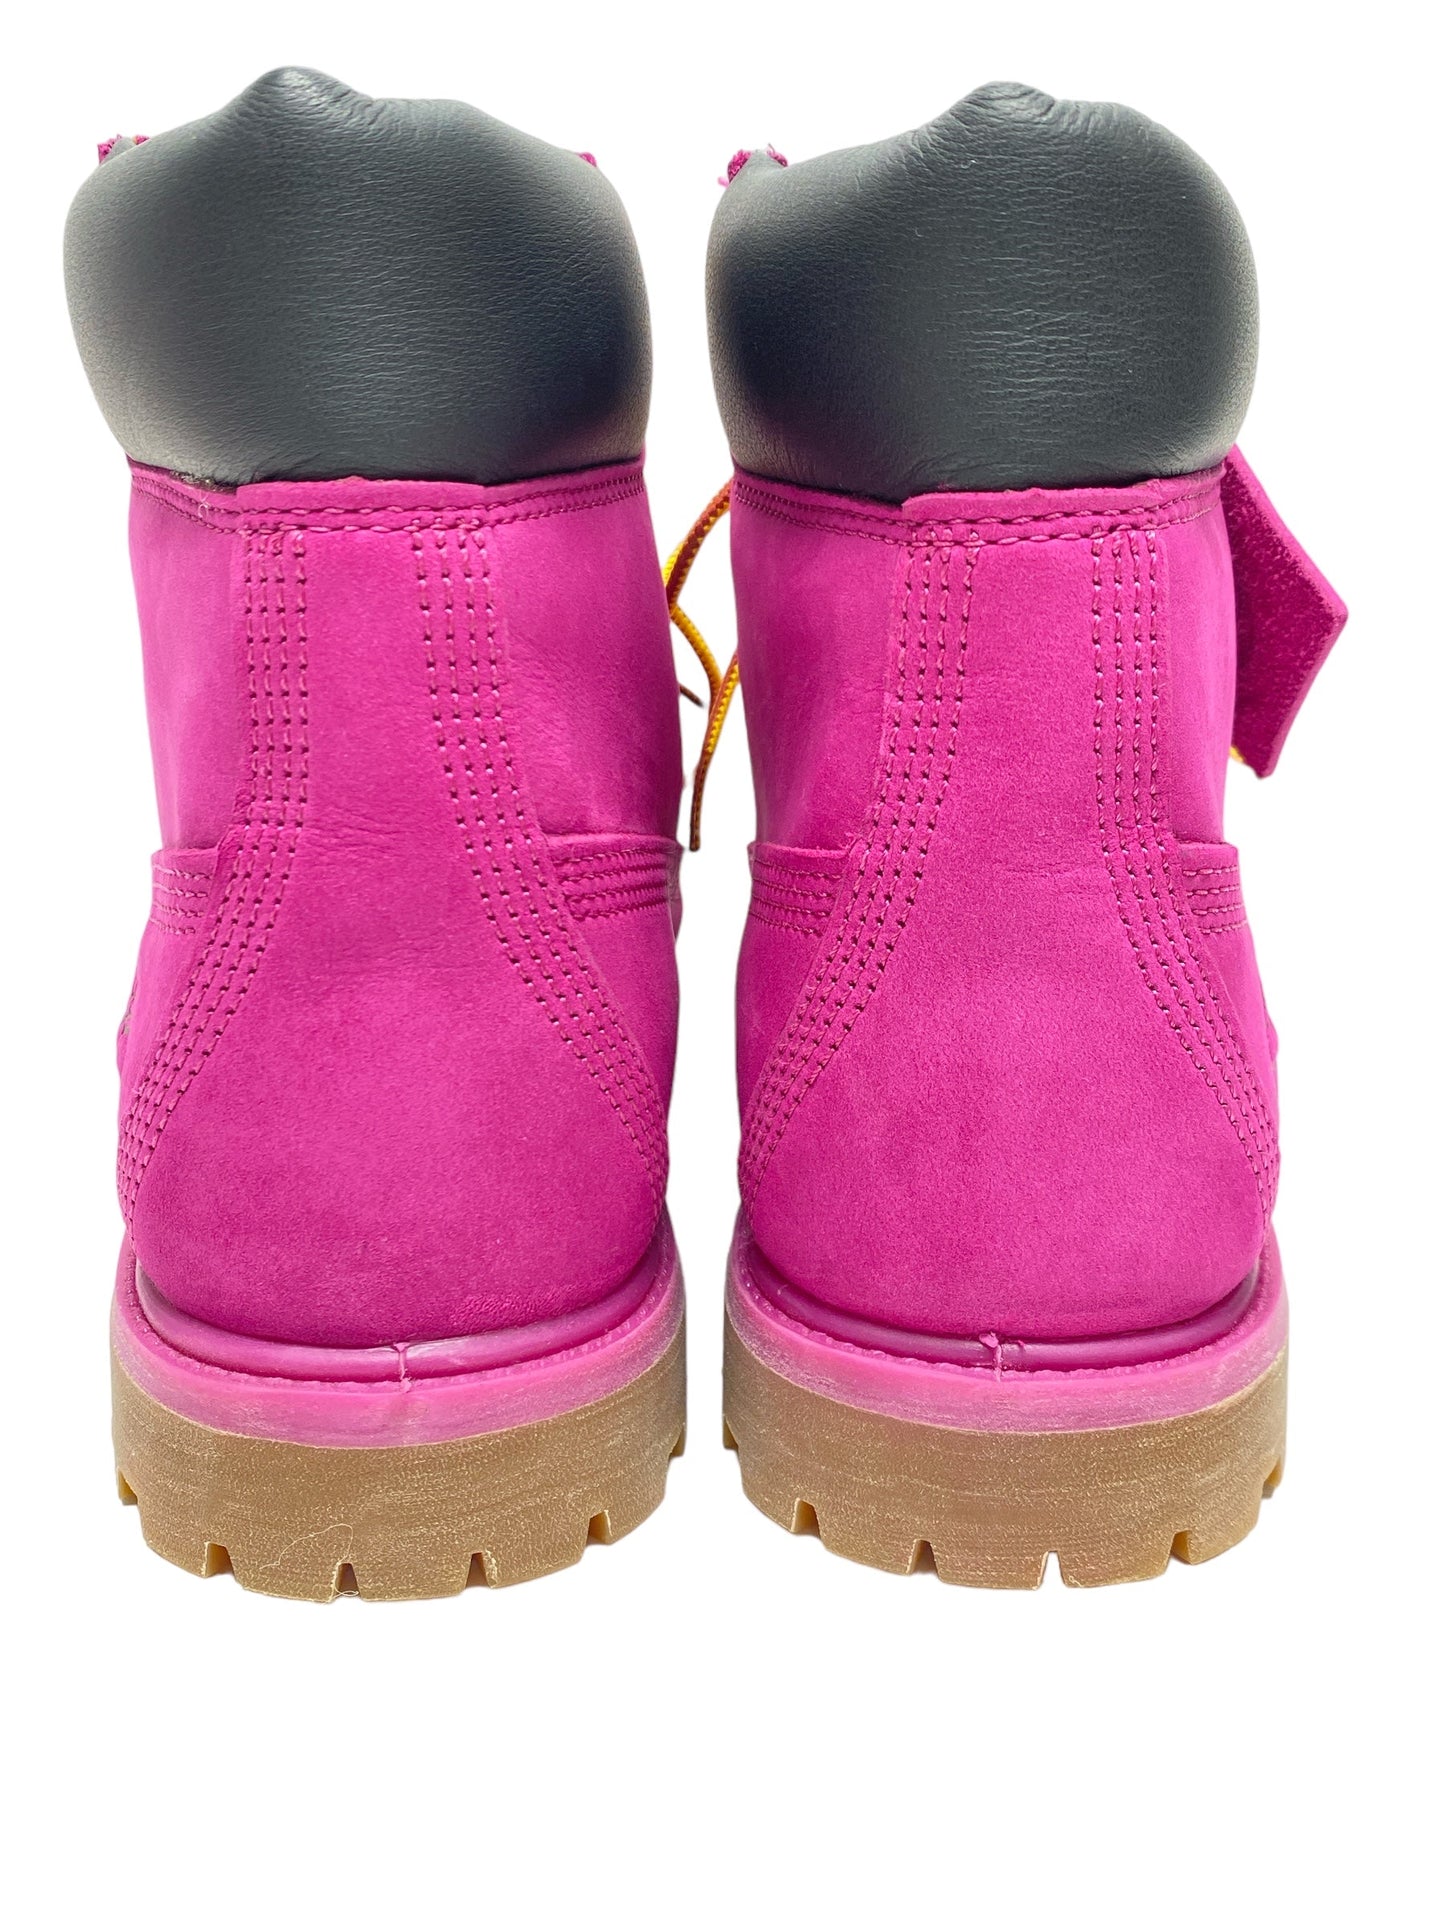 Pink Boots Ankle Heels Timberland, Size 9